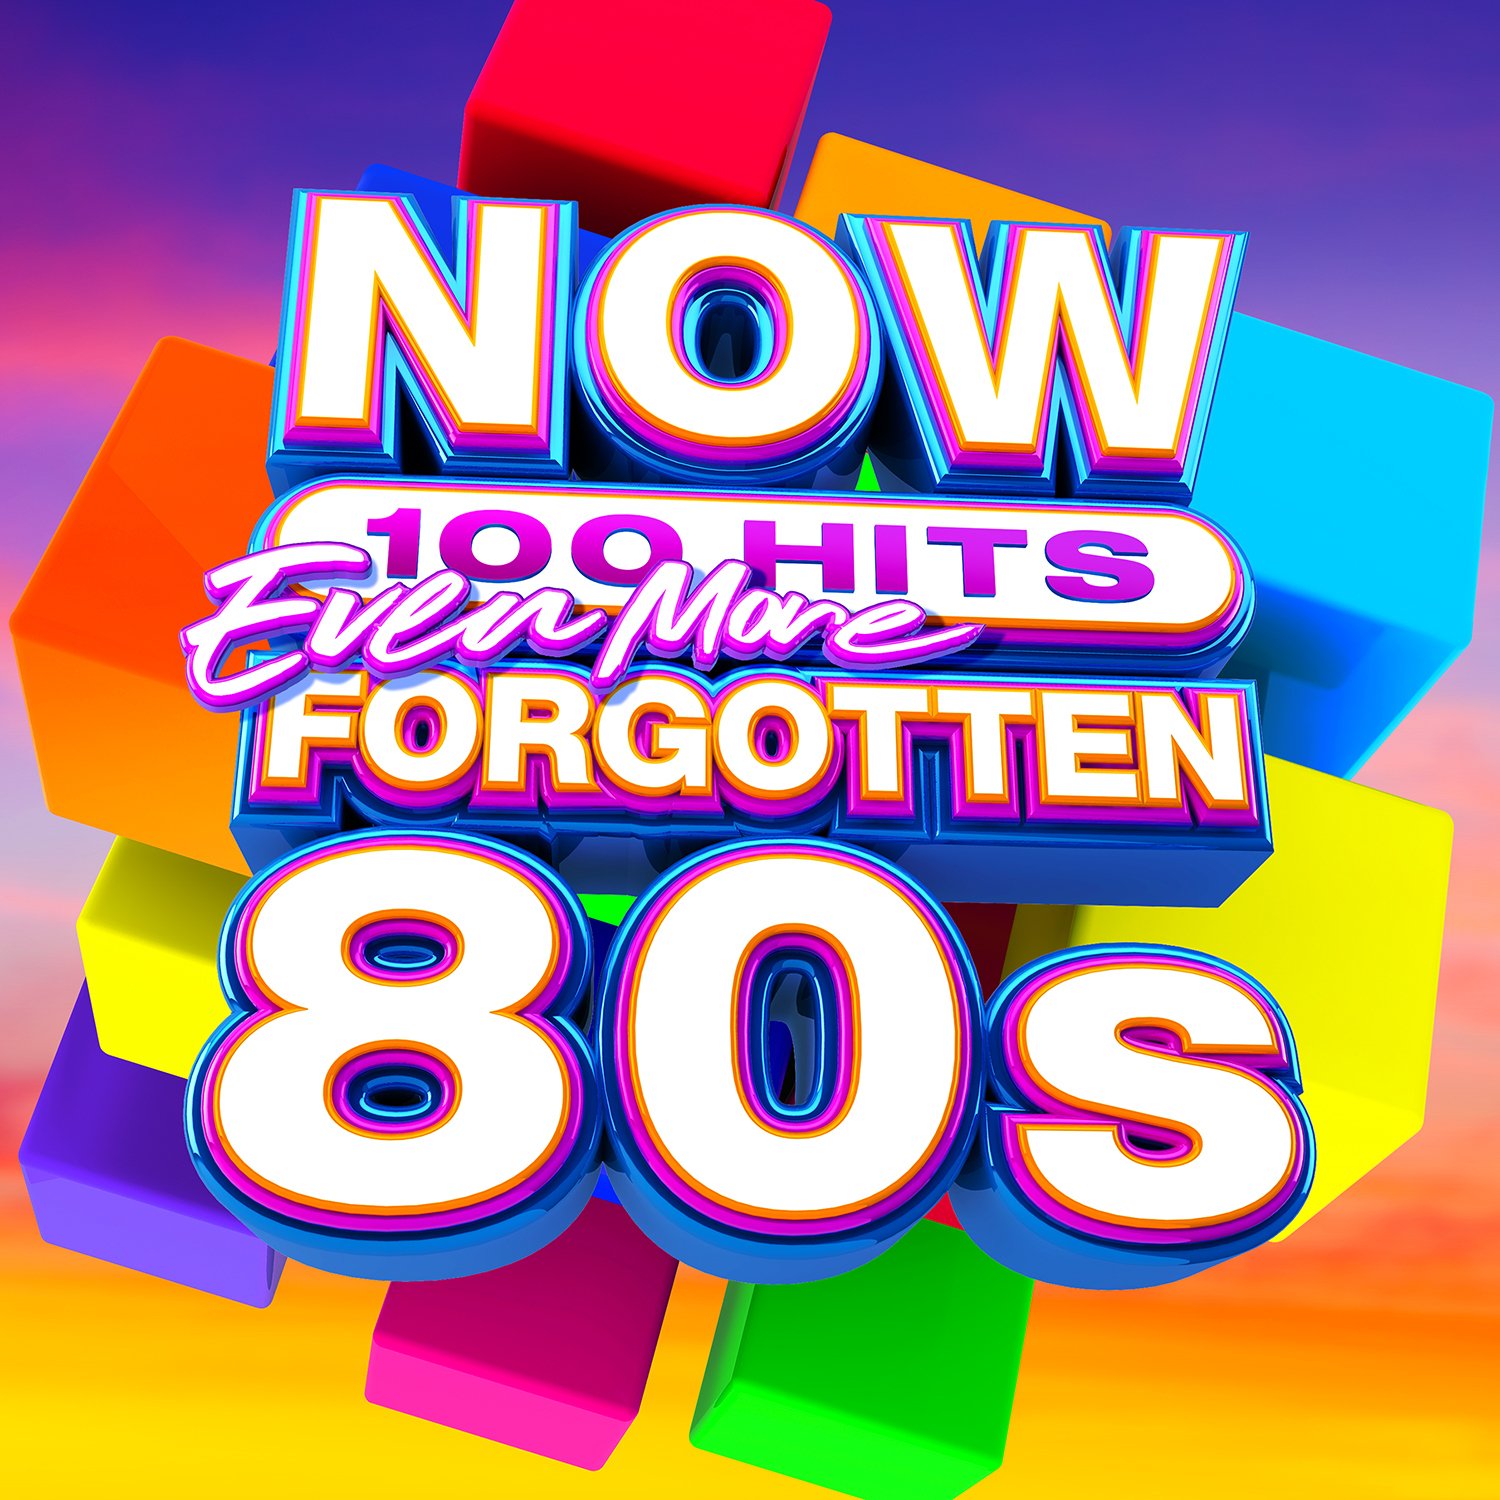 NOW 100 Hits Even More Forgotten 80s CD Review